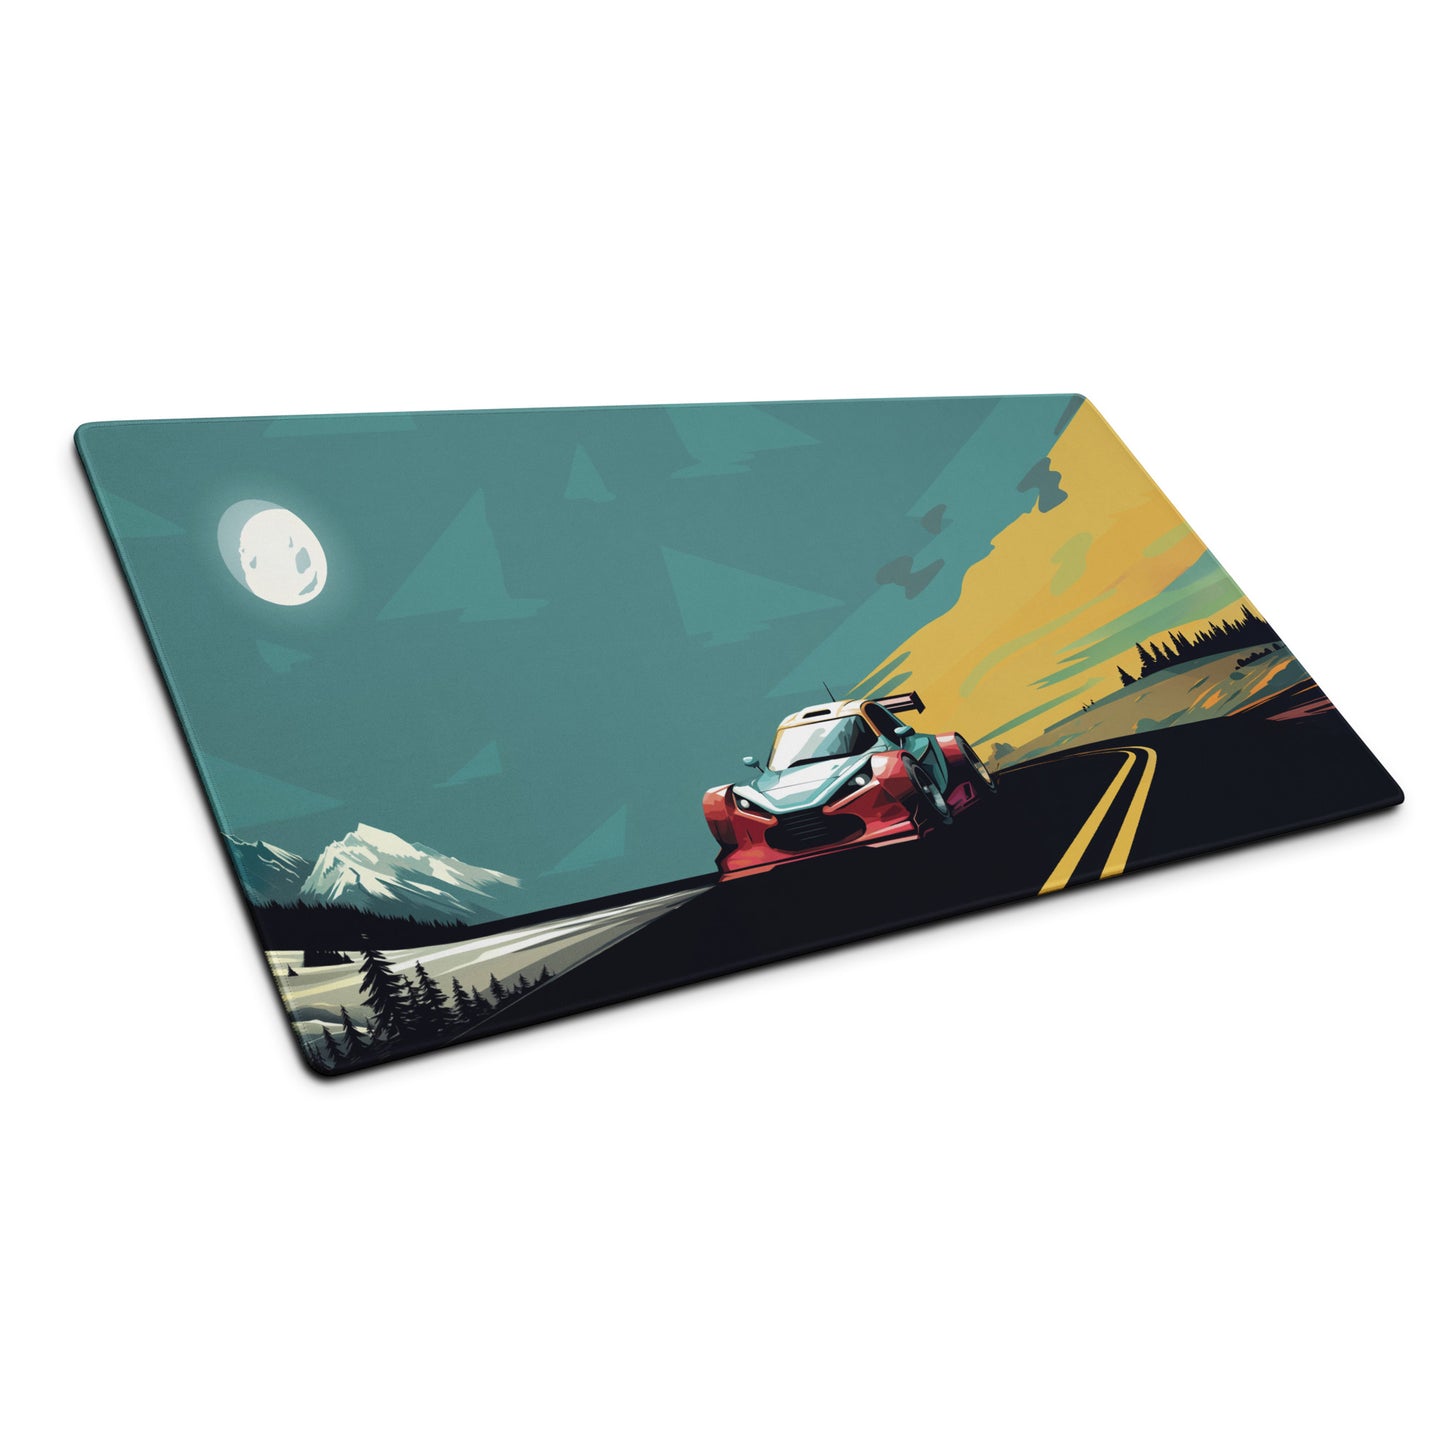 A 36" x 18" gaming desk pad with a futuristic GT car racing through the mountains shown at an angle. Blue and Grey in color.